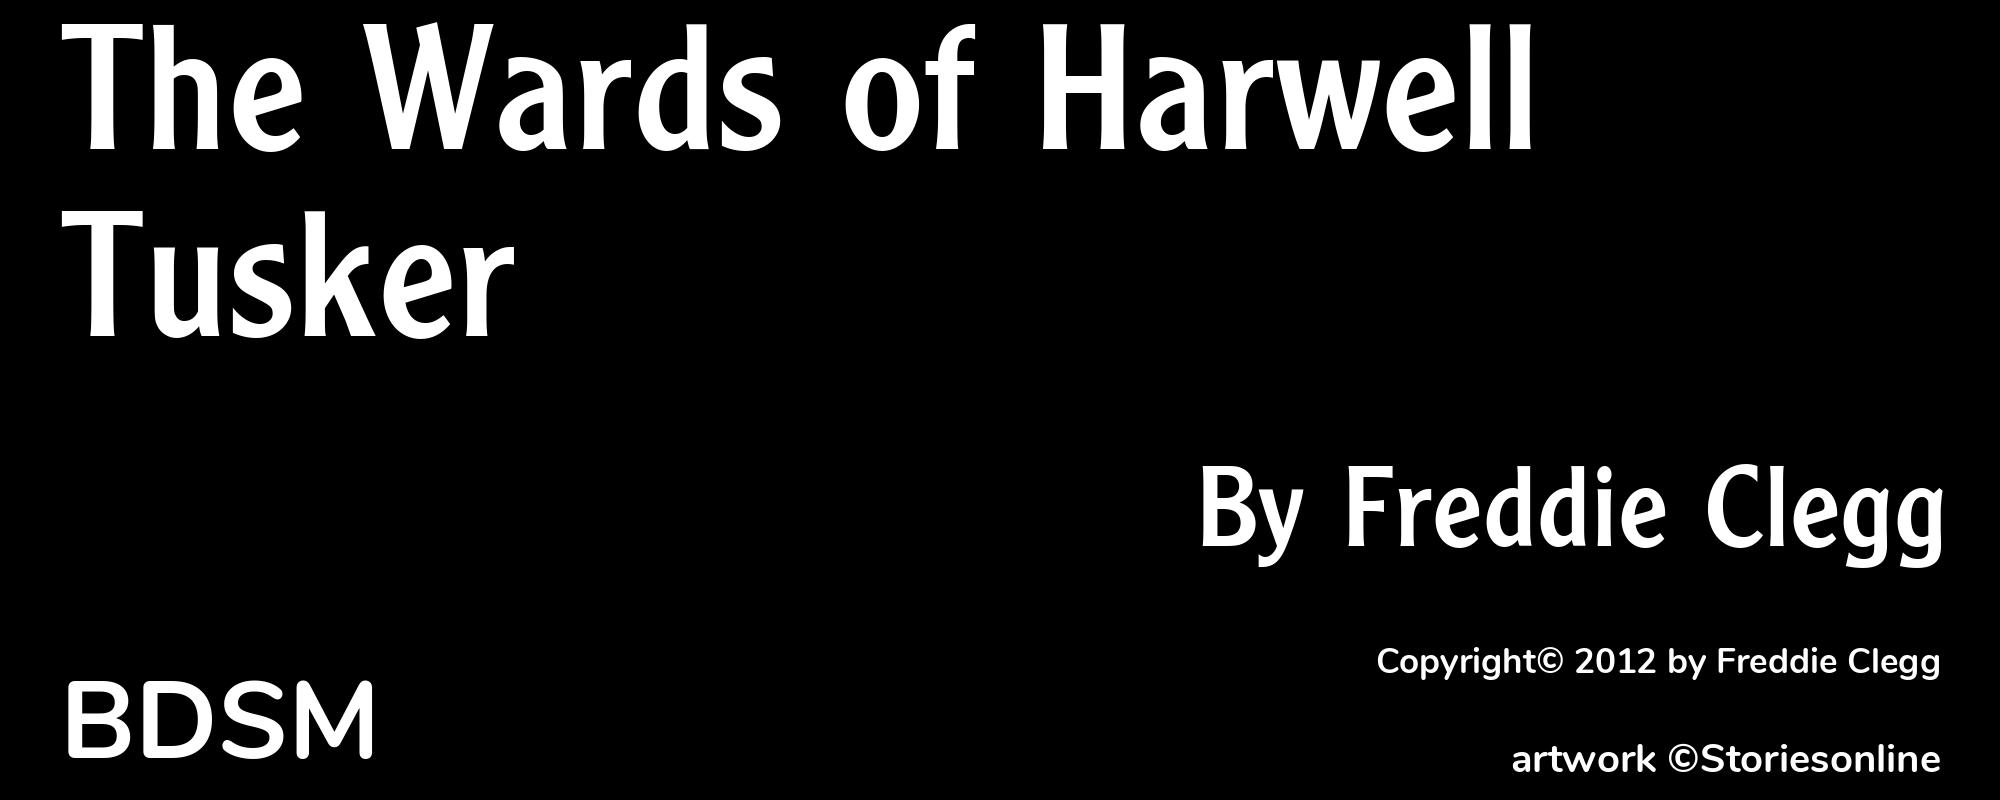 The Wards of Harwell Tusker - Cover